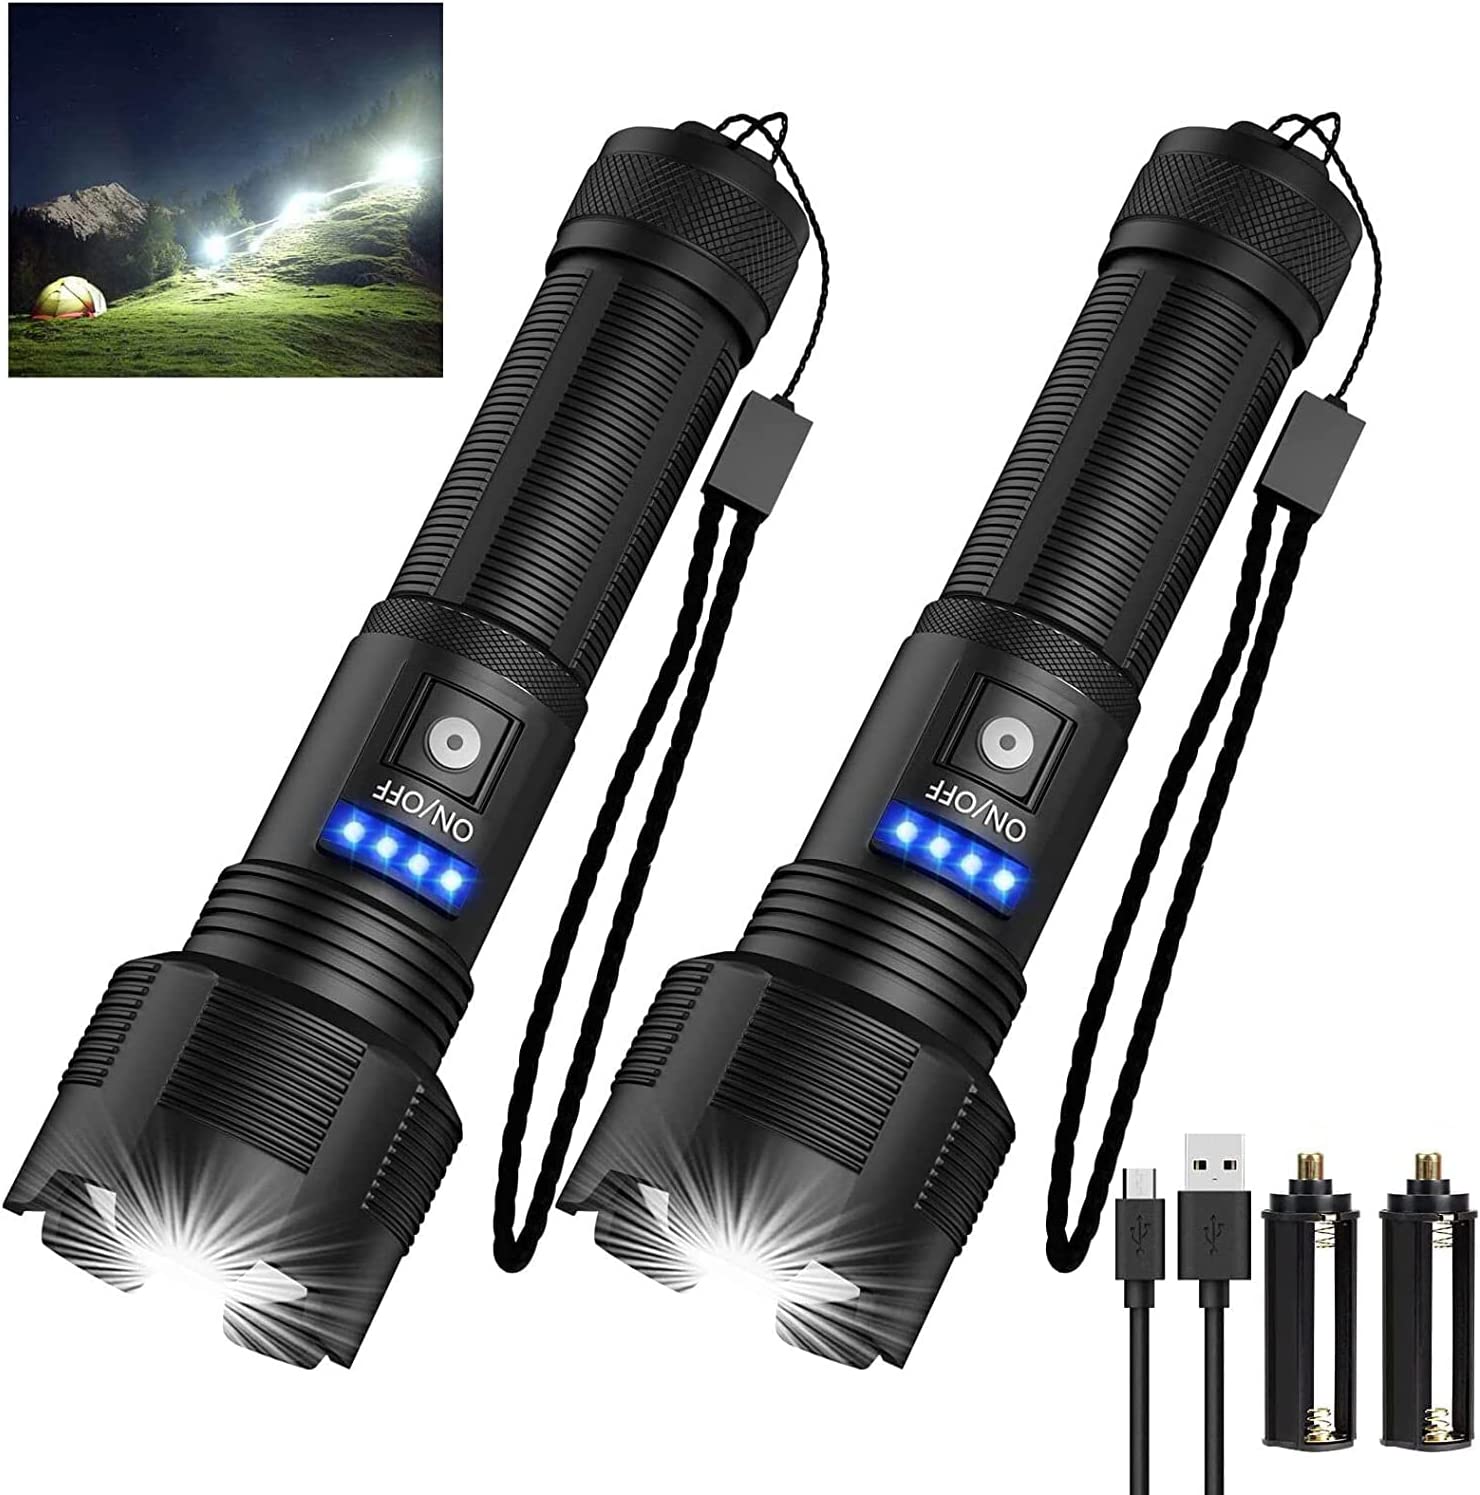 Flashlights High Lumens Rechargeable, 8000 Lumens Super Bright LED Tactical Flashlight IPX4 Waterproof Flash Light, Zoomable, 5 Modes, Powerful Handheld Flashlight for Camping Emergency(xhp50-2)